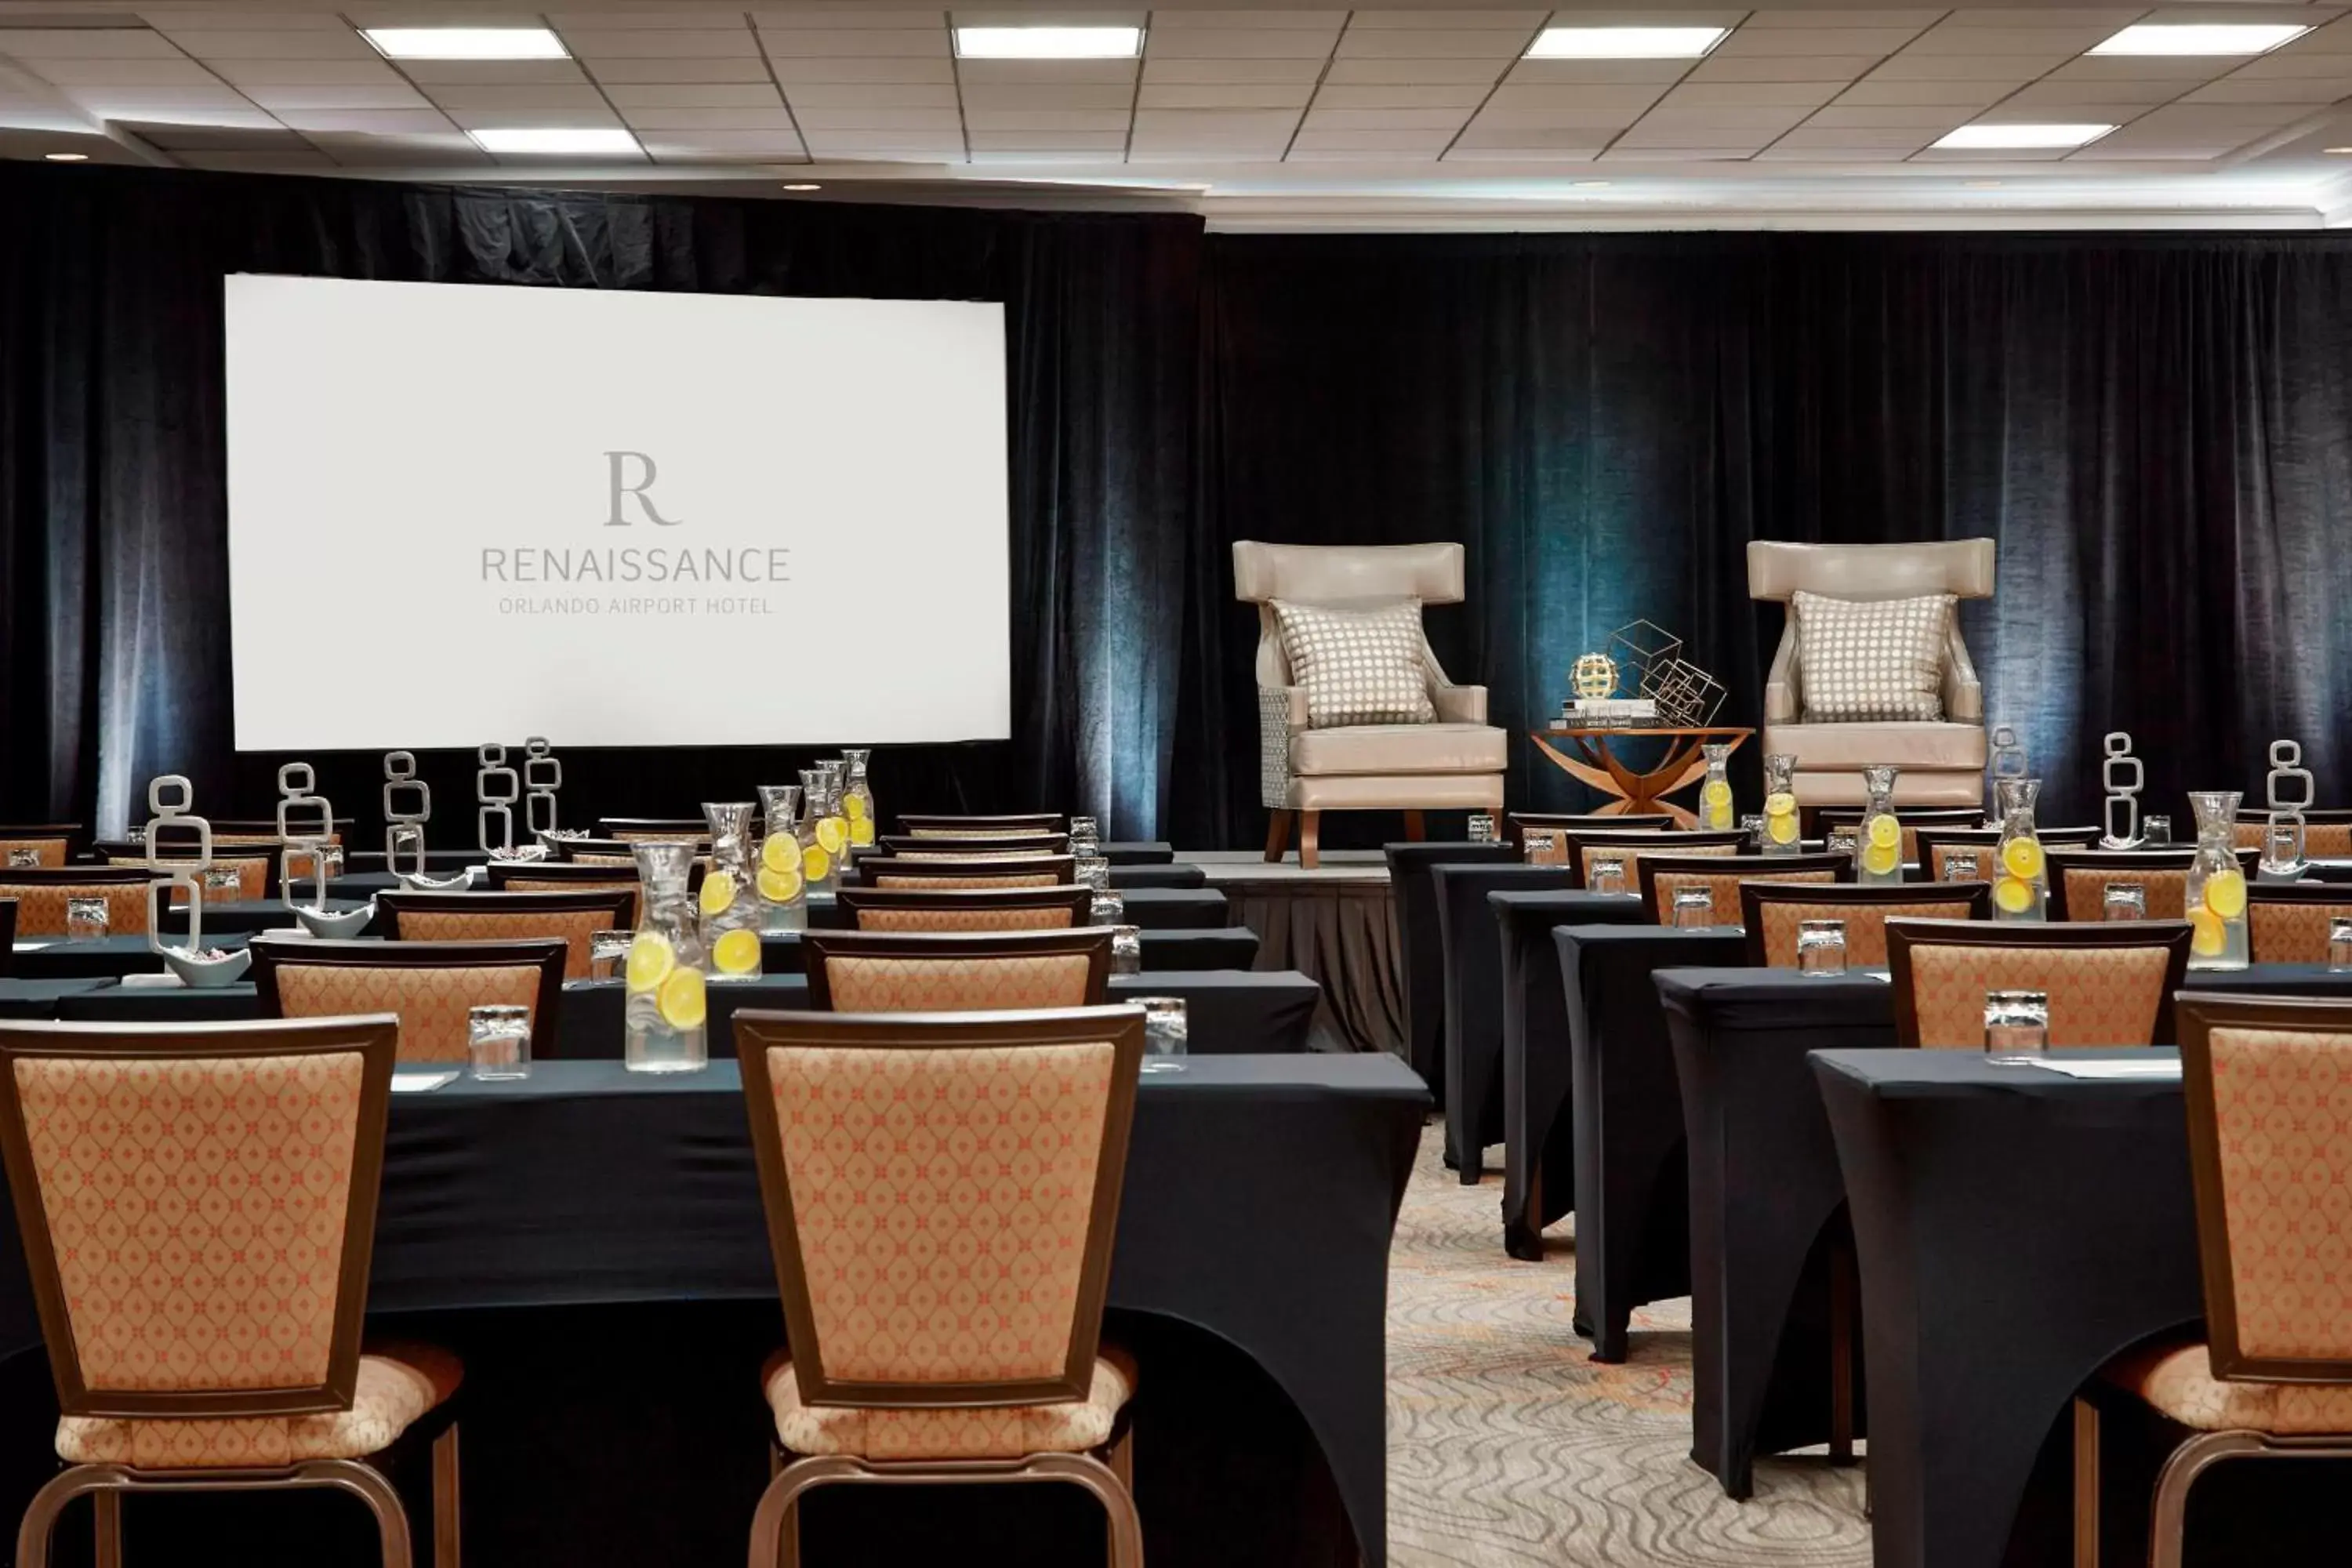 Meeting/conference room in Renaissance Orlando Airport Hotel